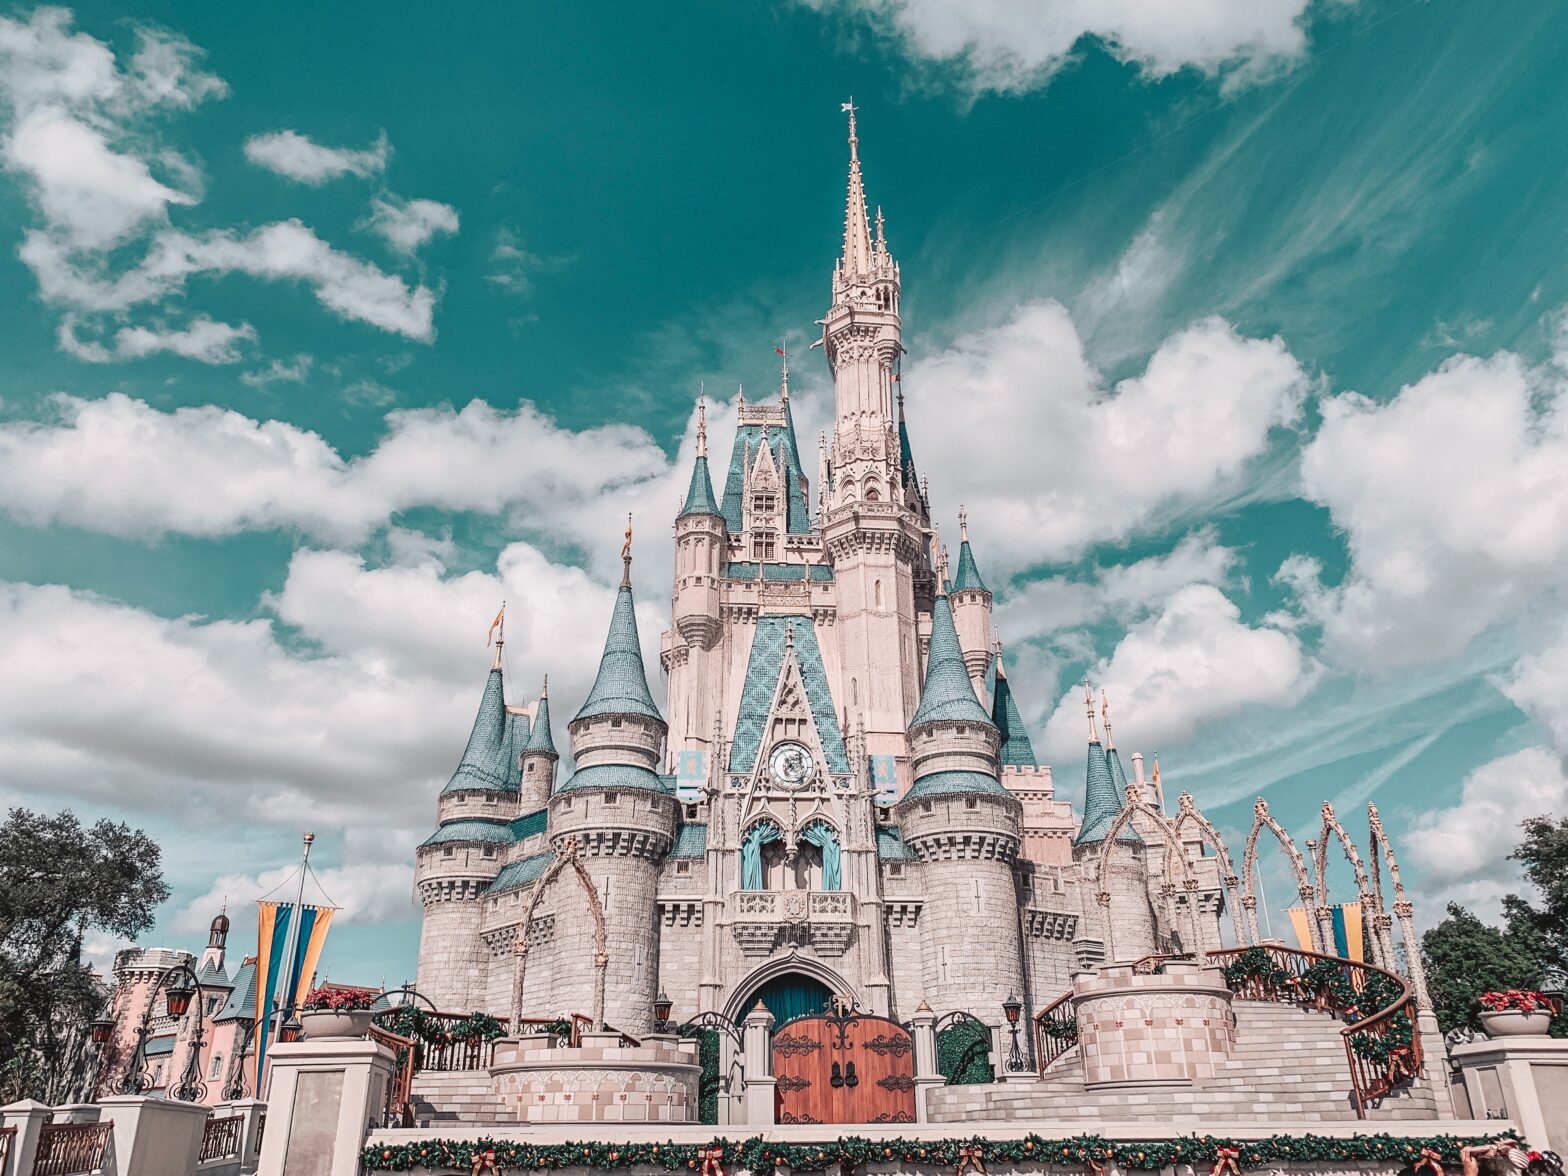 Disney World To Impose Restrictions to Ensure Guest Safety And Enjoyment